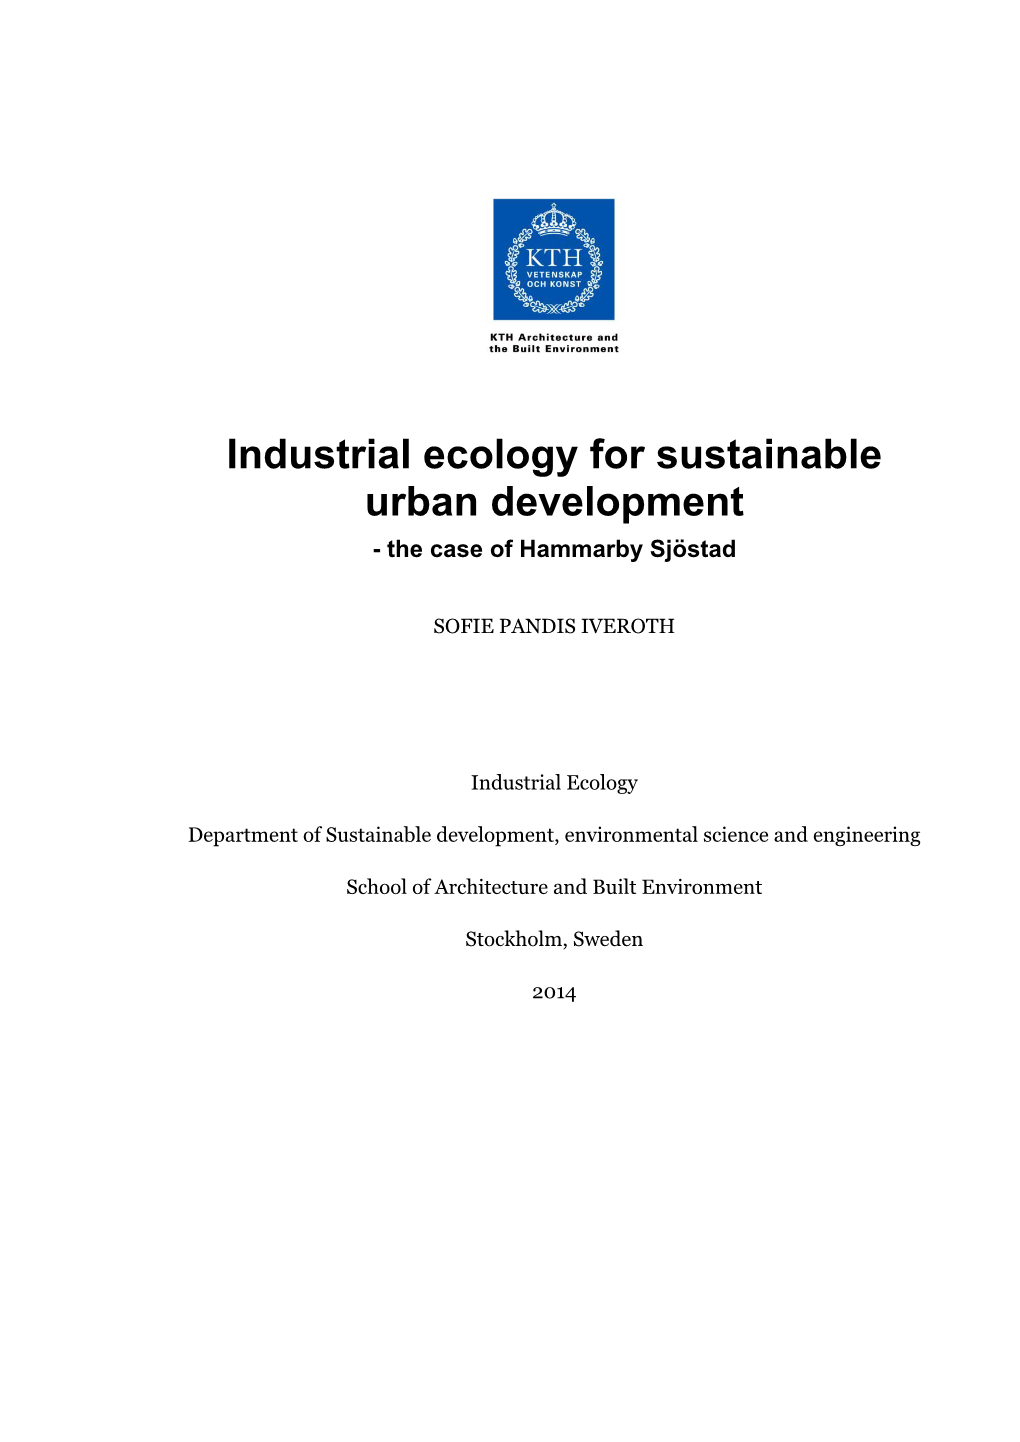 Industrial Ecology for Sustainable Urban Development - the Case of Hammarby Sjöstad